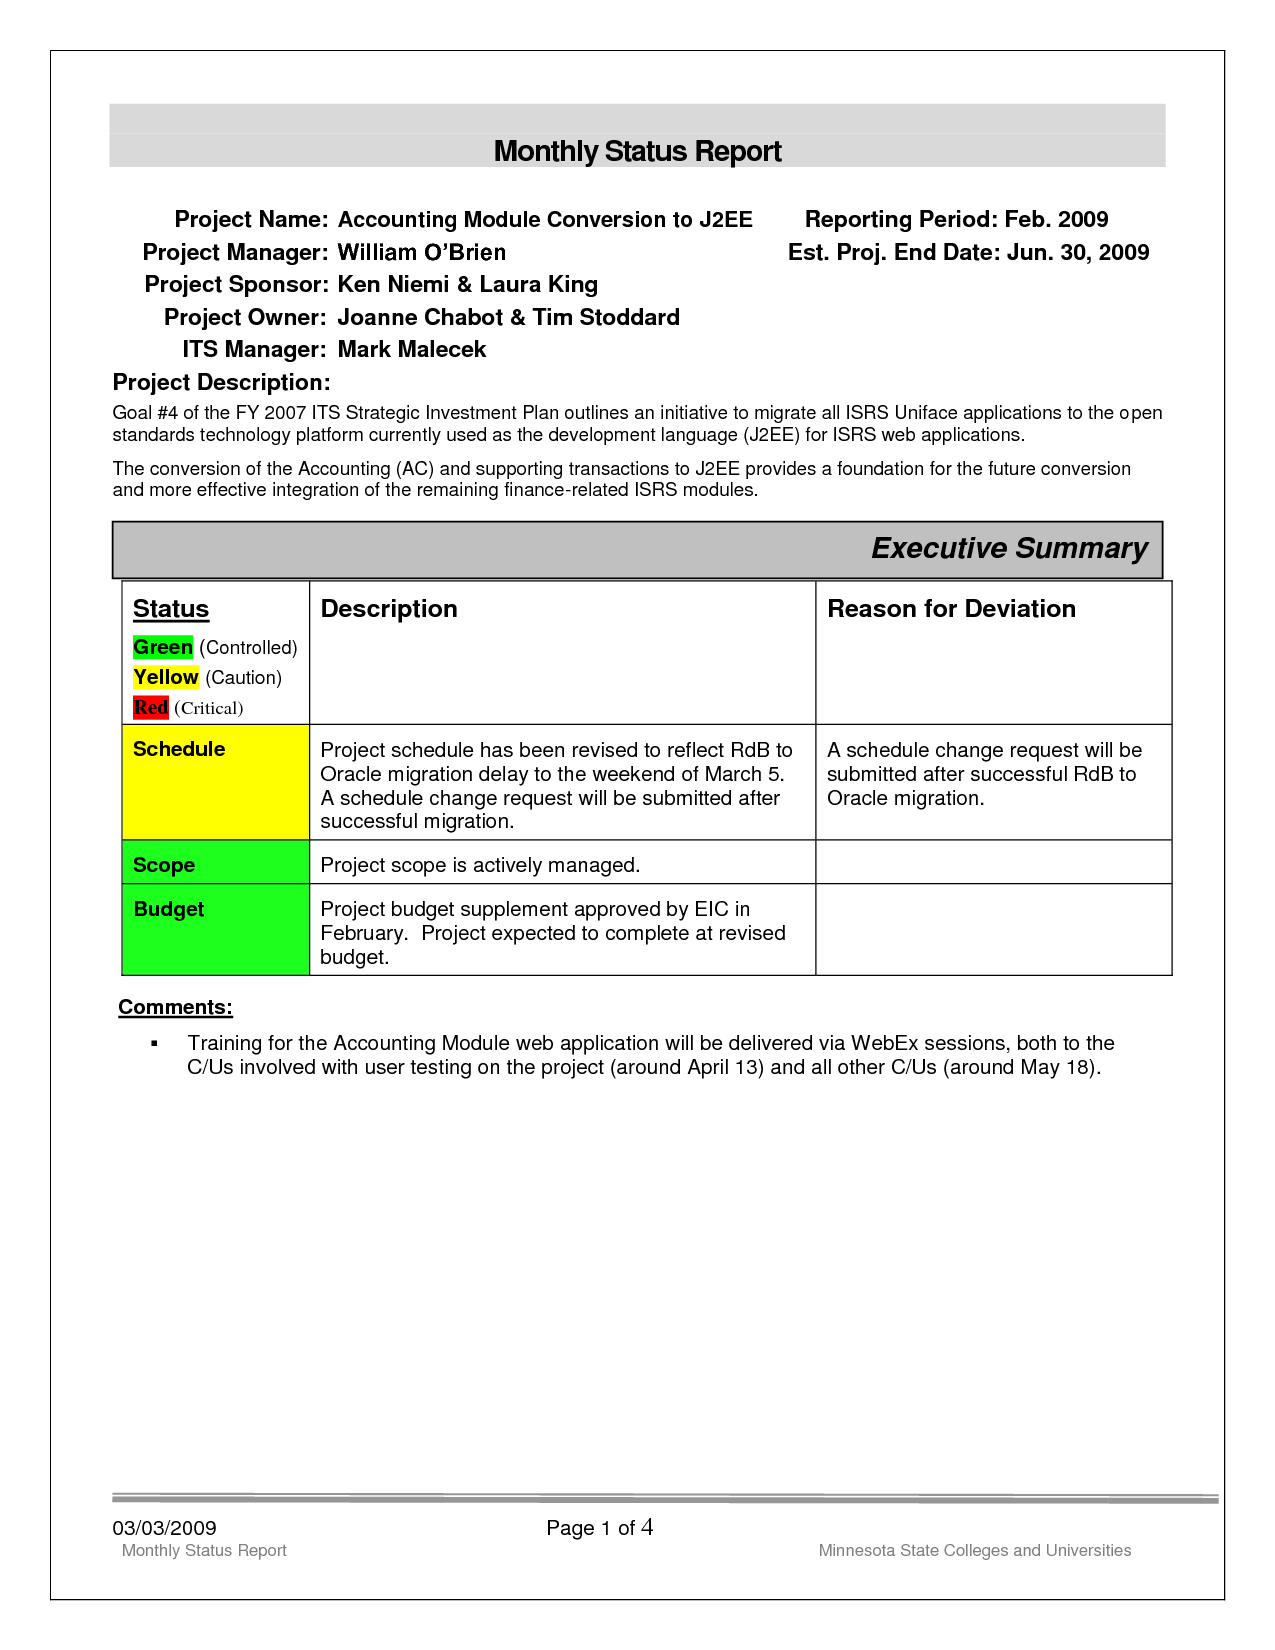 Replacethis] Monthly Status Report Template Format And Throughout Project Monthly Status Report Template